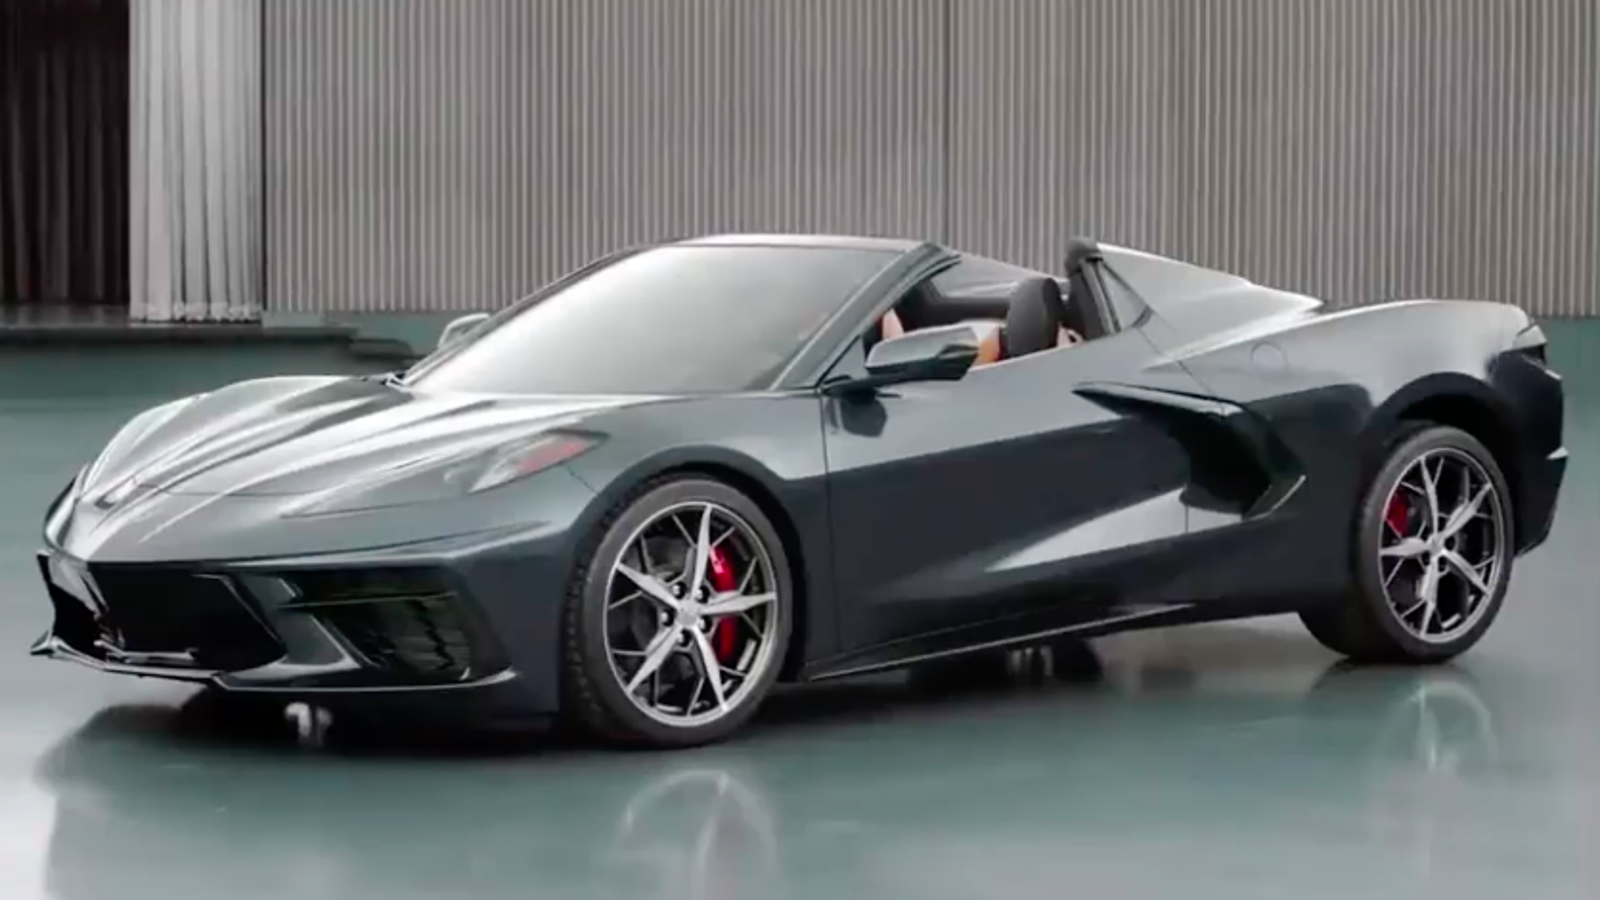 Here's a First Look at the New C8 Corvette Convertible